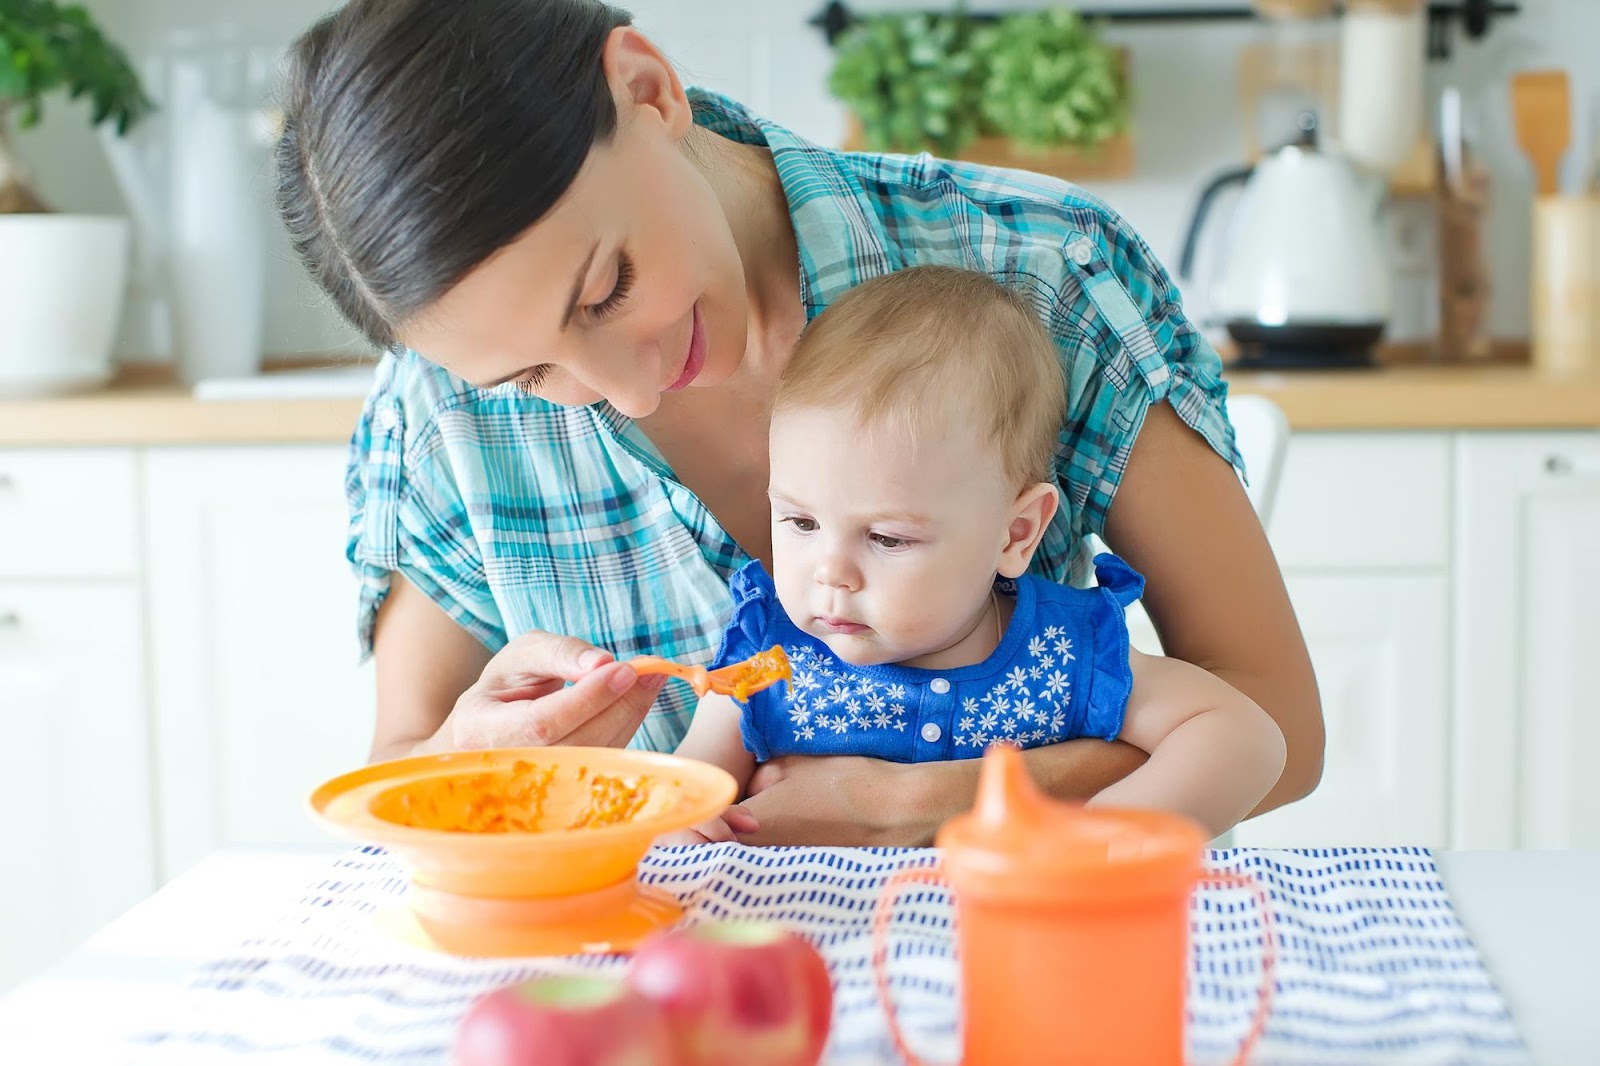 A young mother feeding her baby puree